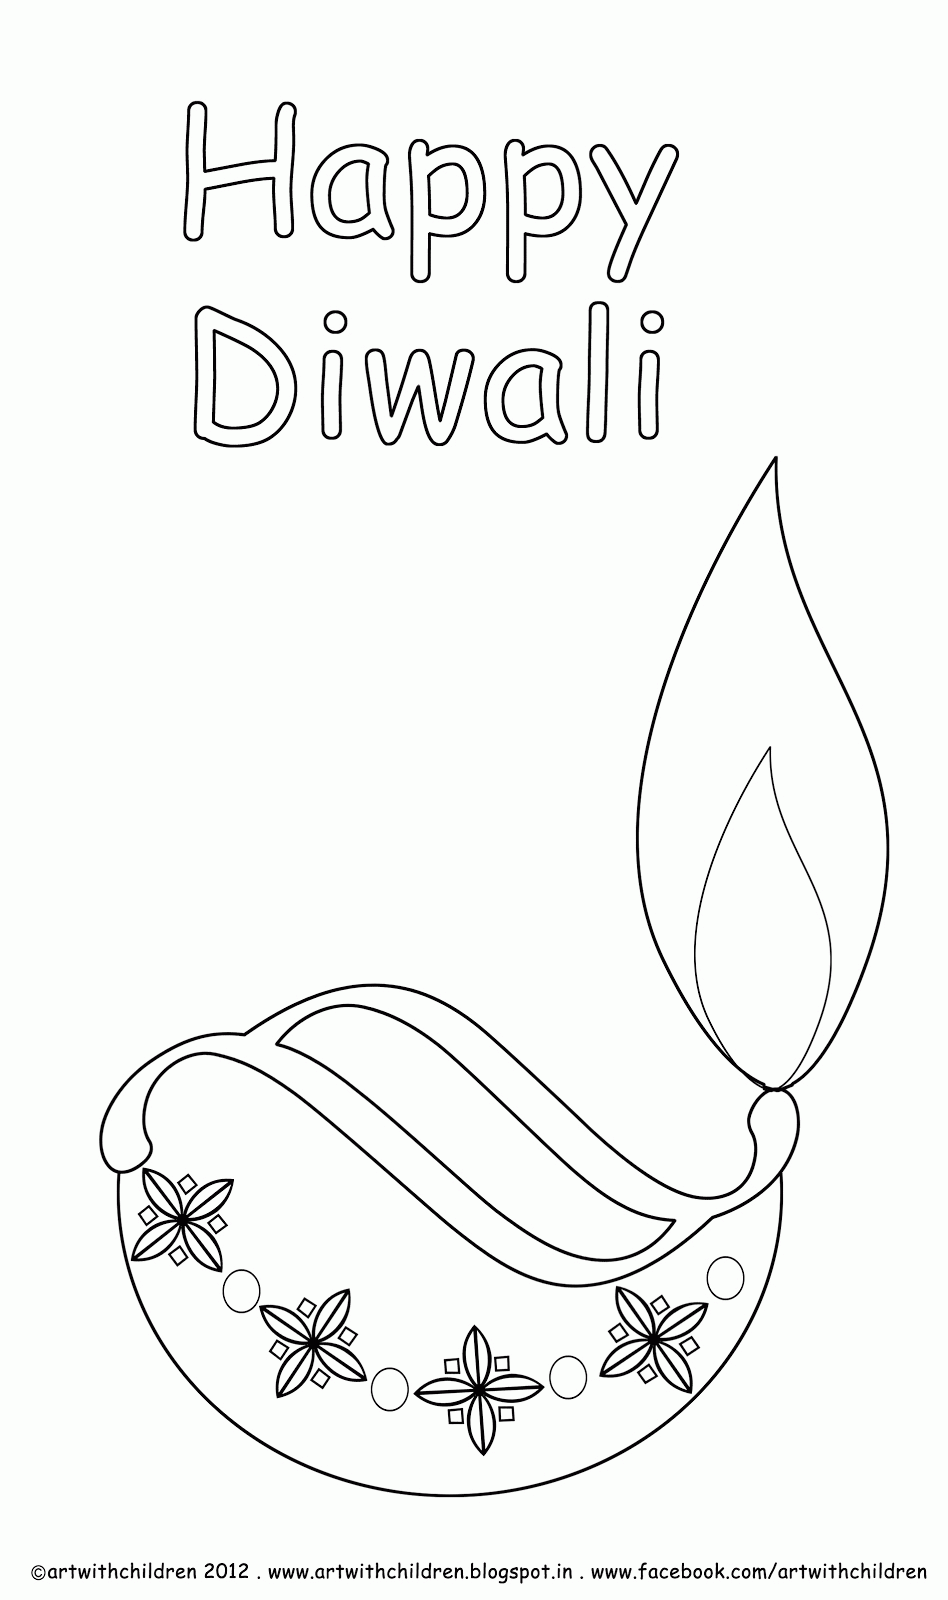 diwali coloring pages - Free Large Images